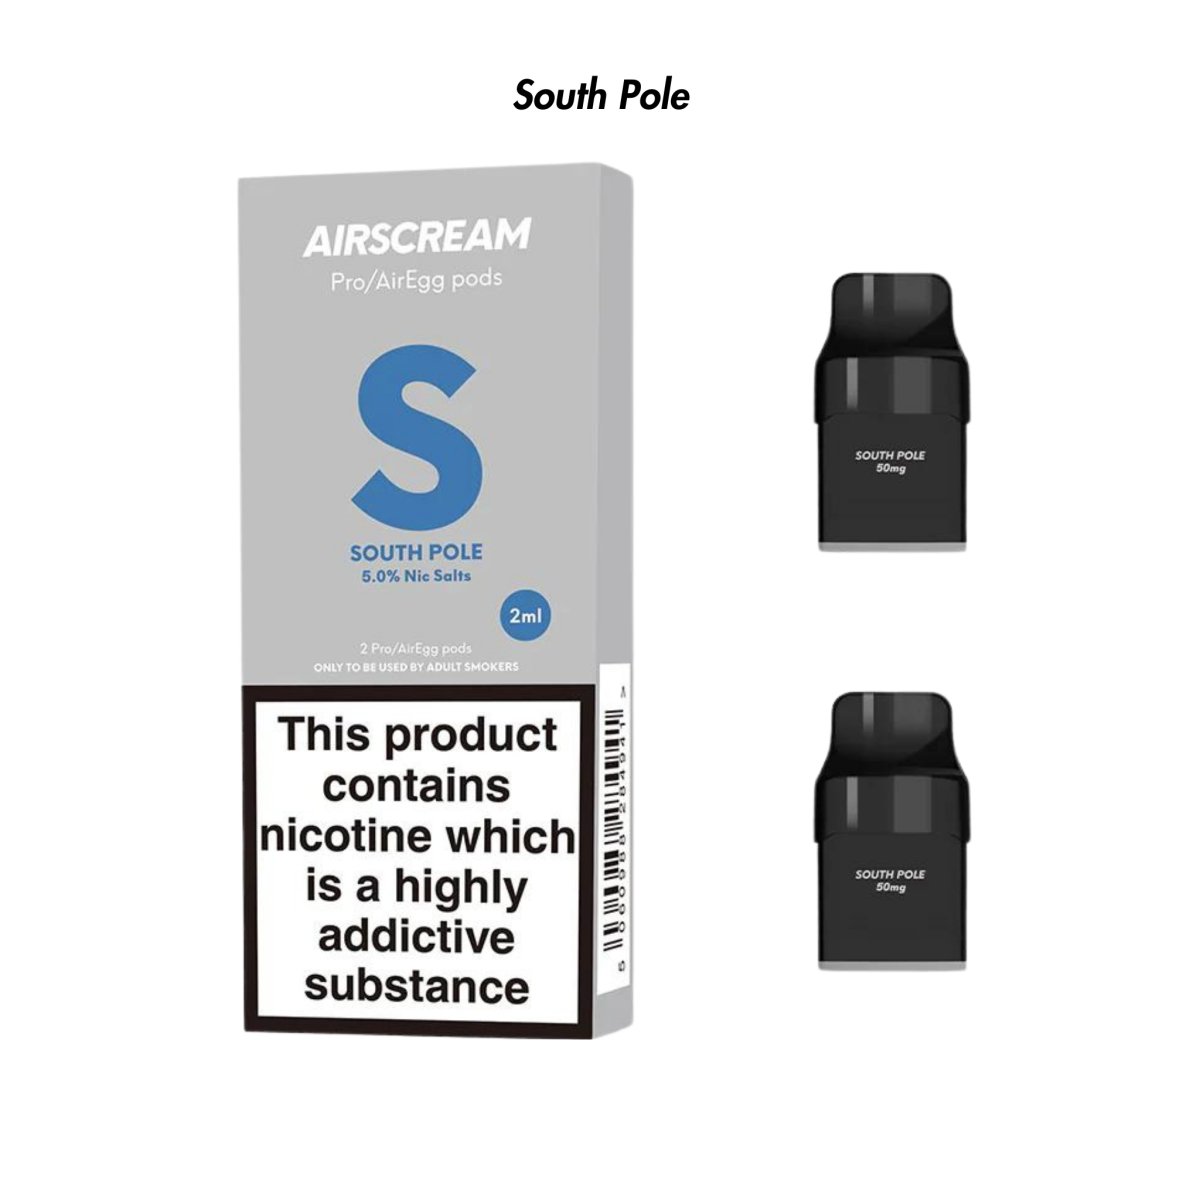 South Pole Prefilled Airscream Pro/AirEgg Pods from The Smoke Organic Store with Fast Delivery in South Africa